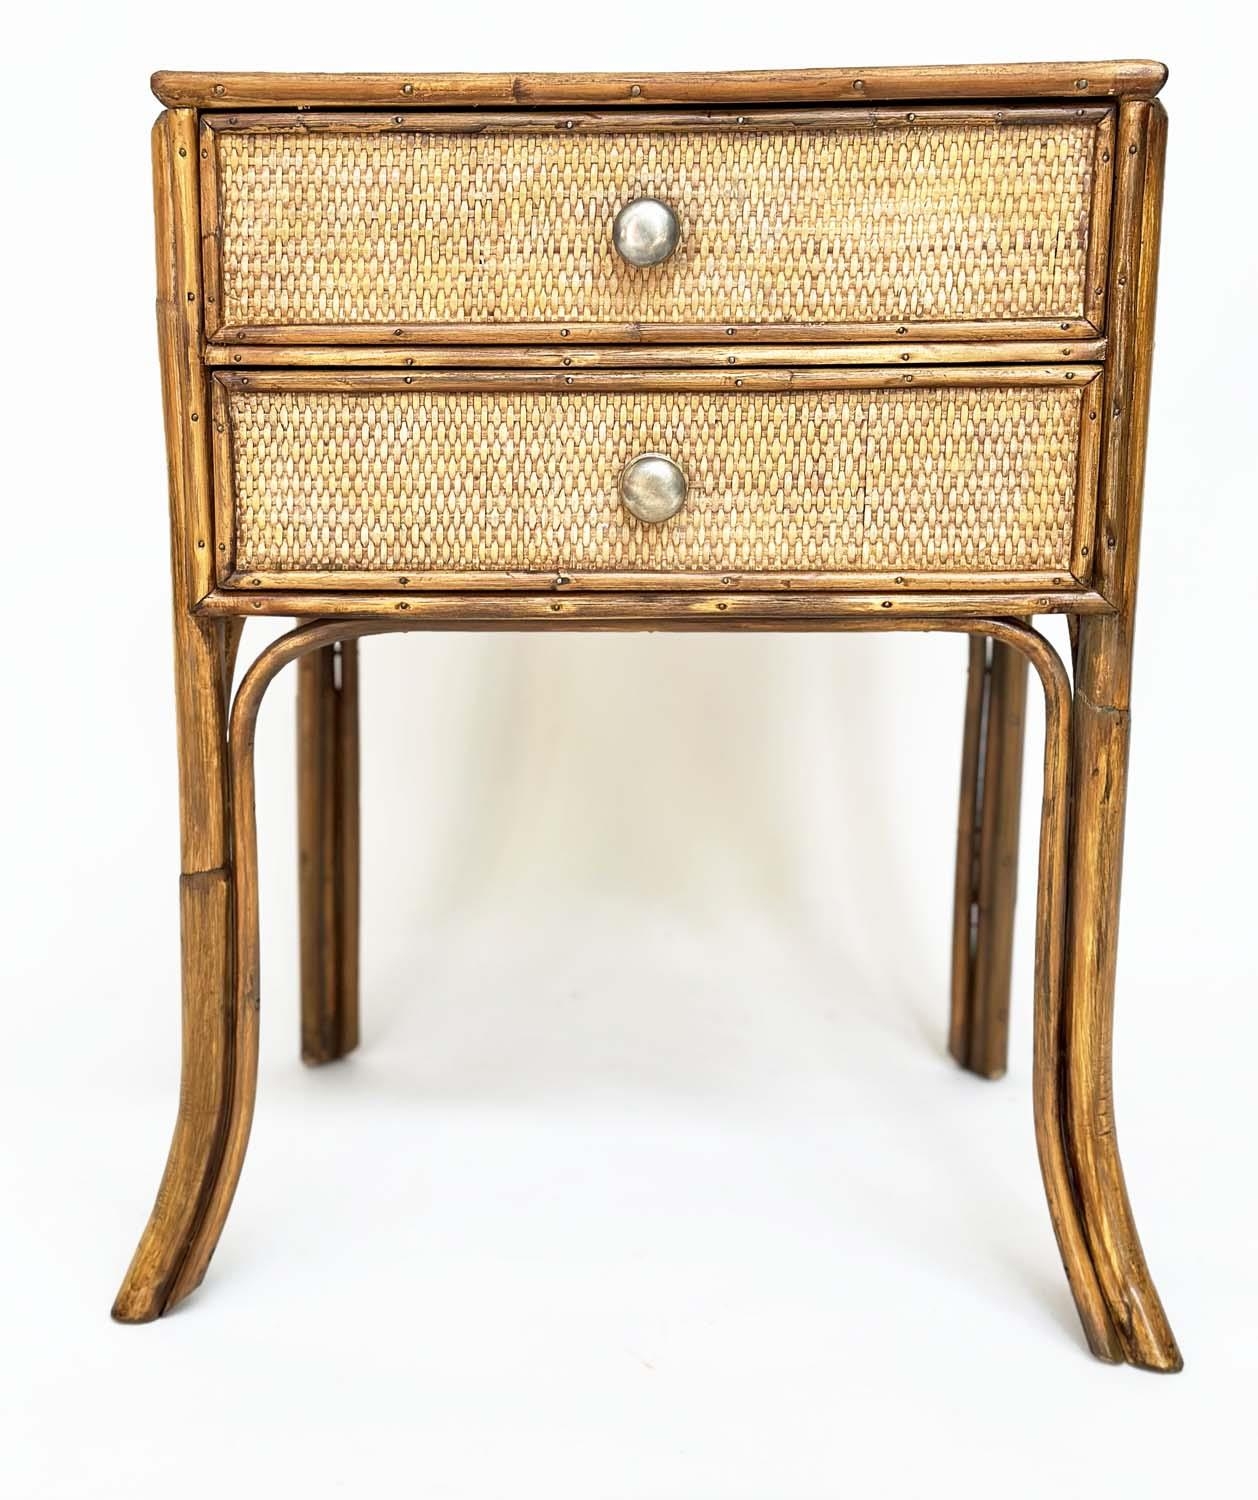 BAMBOO LAMP TABLES, a pair, vintage rattan framed wicker panelled and cane bound each with two - Image 3 of 8